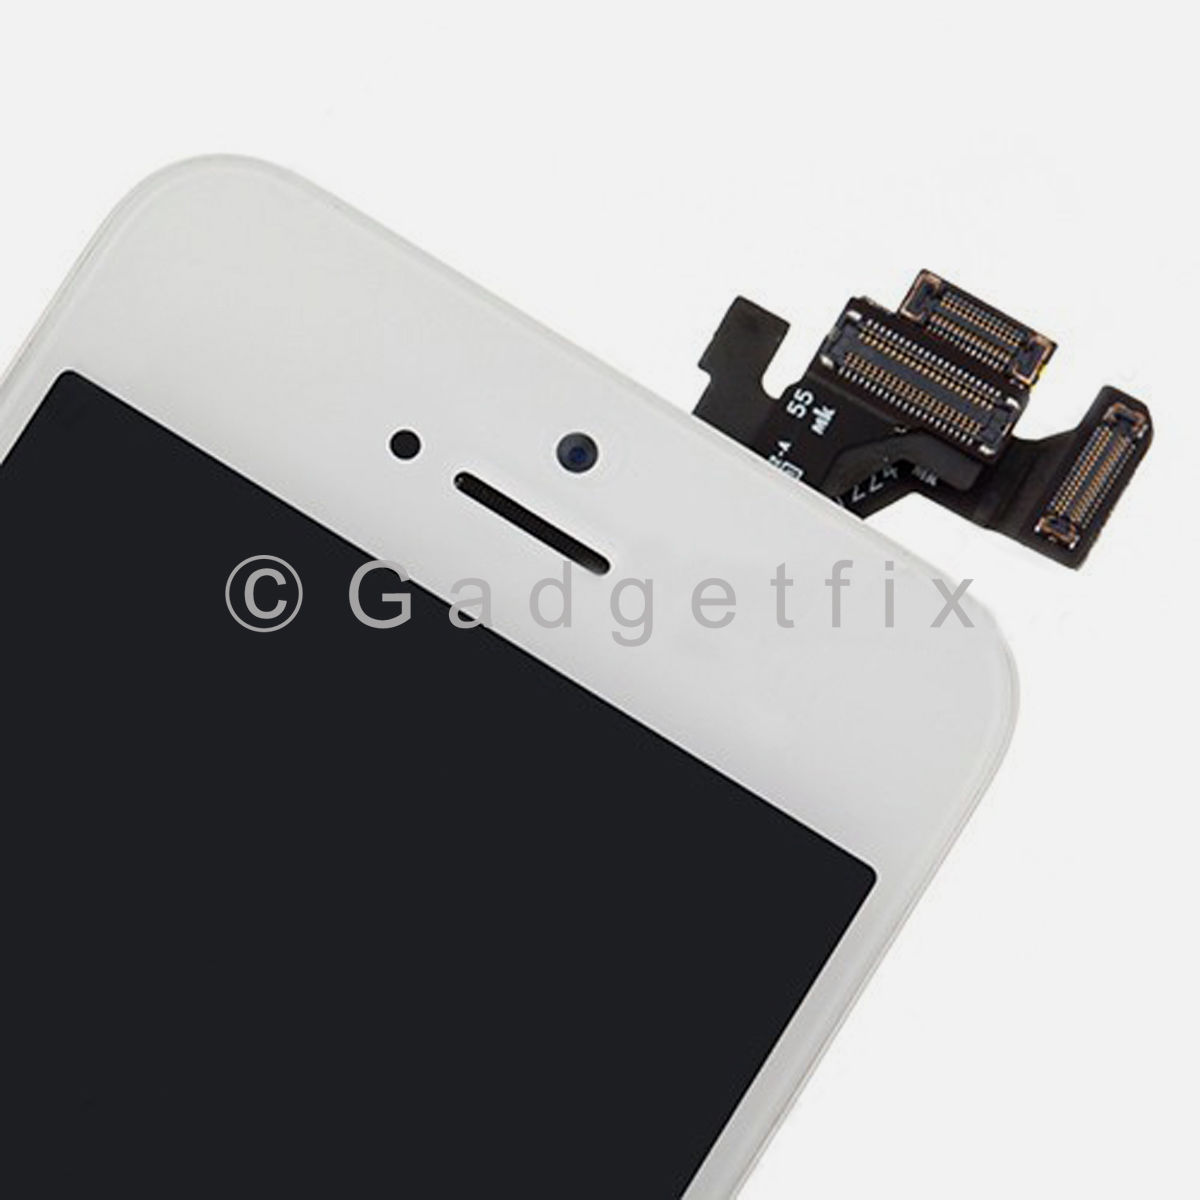 White Touch Screen Digitizer LCD Display Button + Camera + Button for iPhone 5